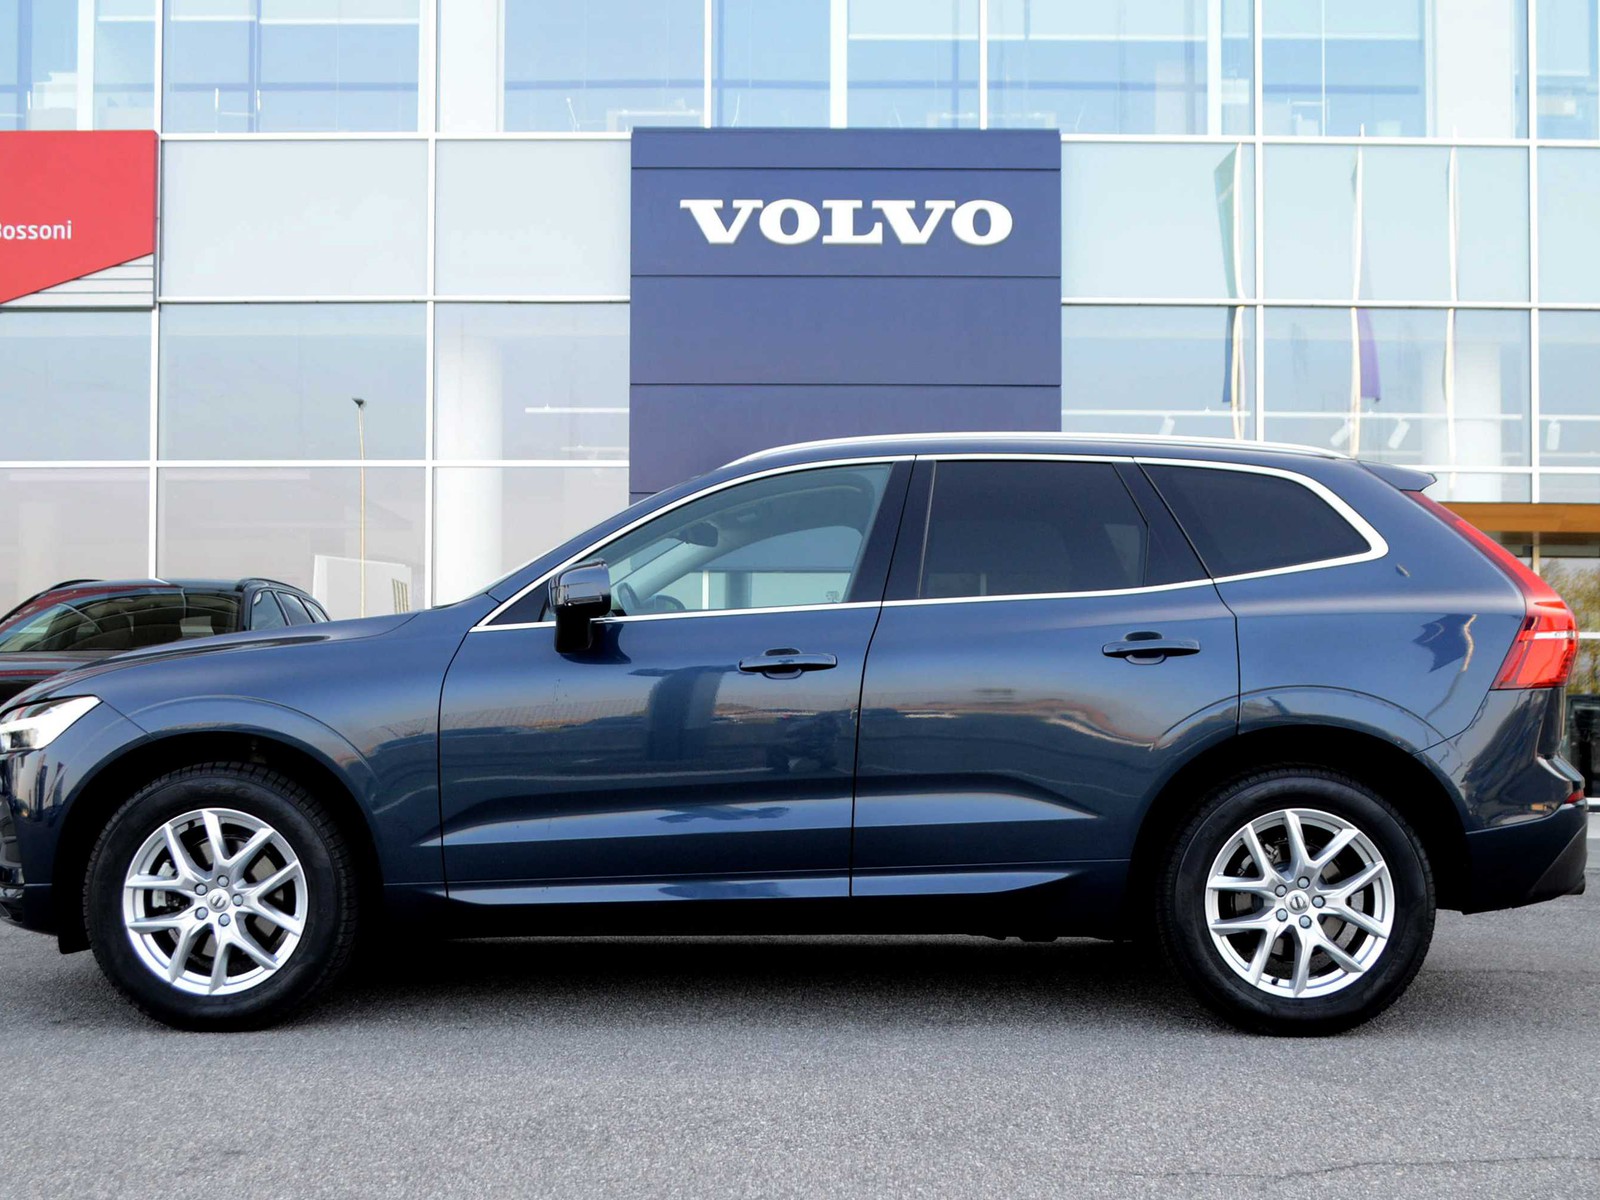 24 - Volvo XC60 2.0 d4 business awd geartronic